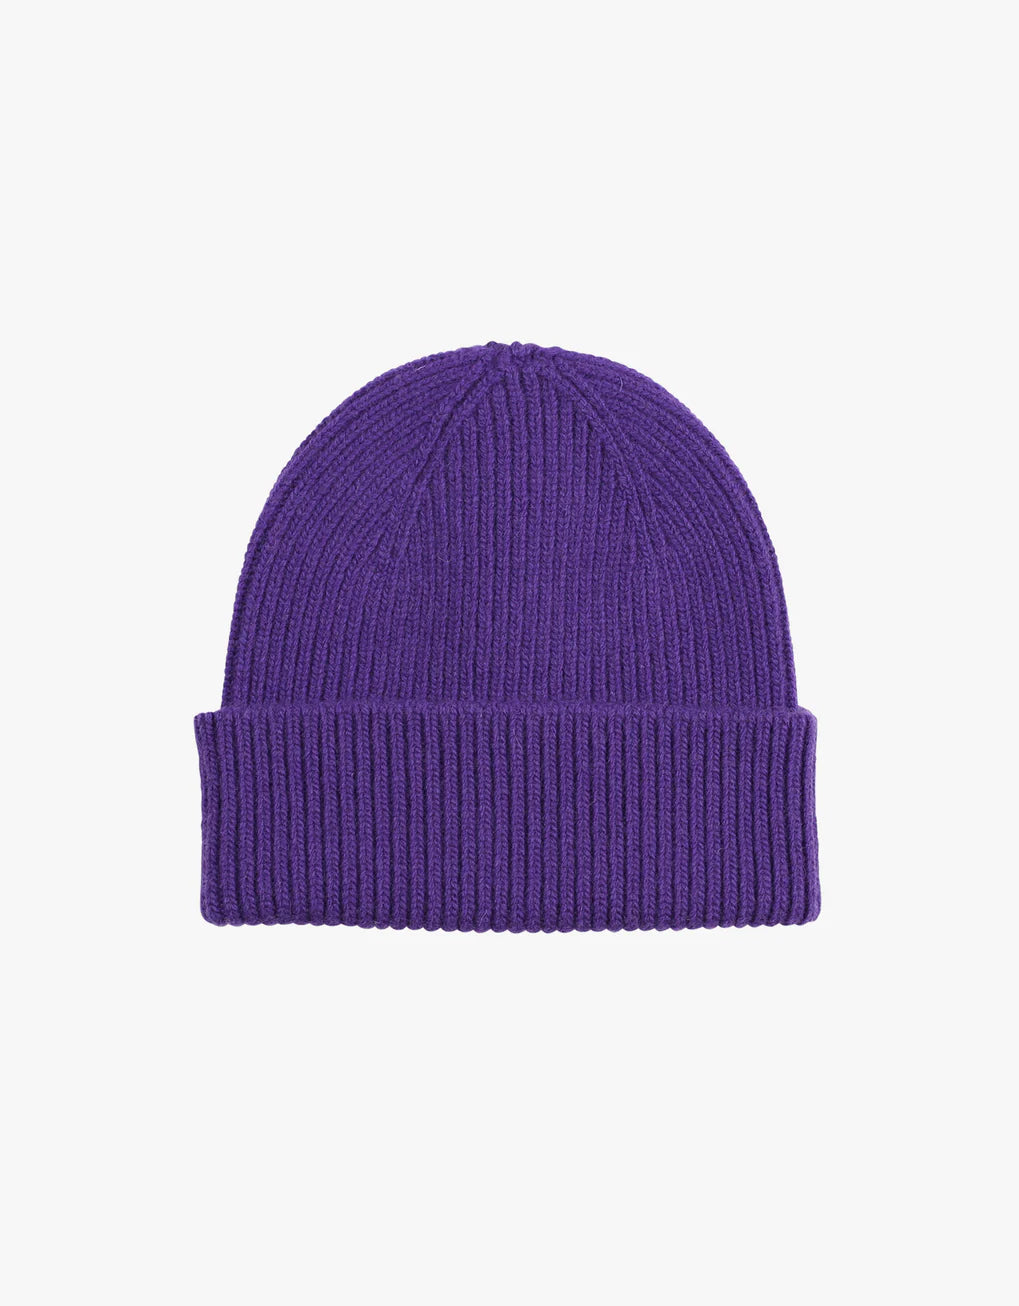 A Colorful Standard Merino Wool Beanie, made of wool, on a white background.